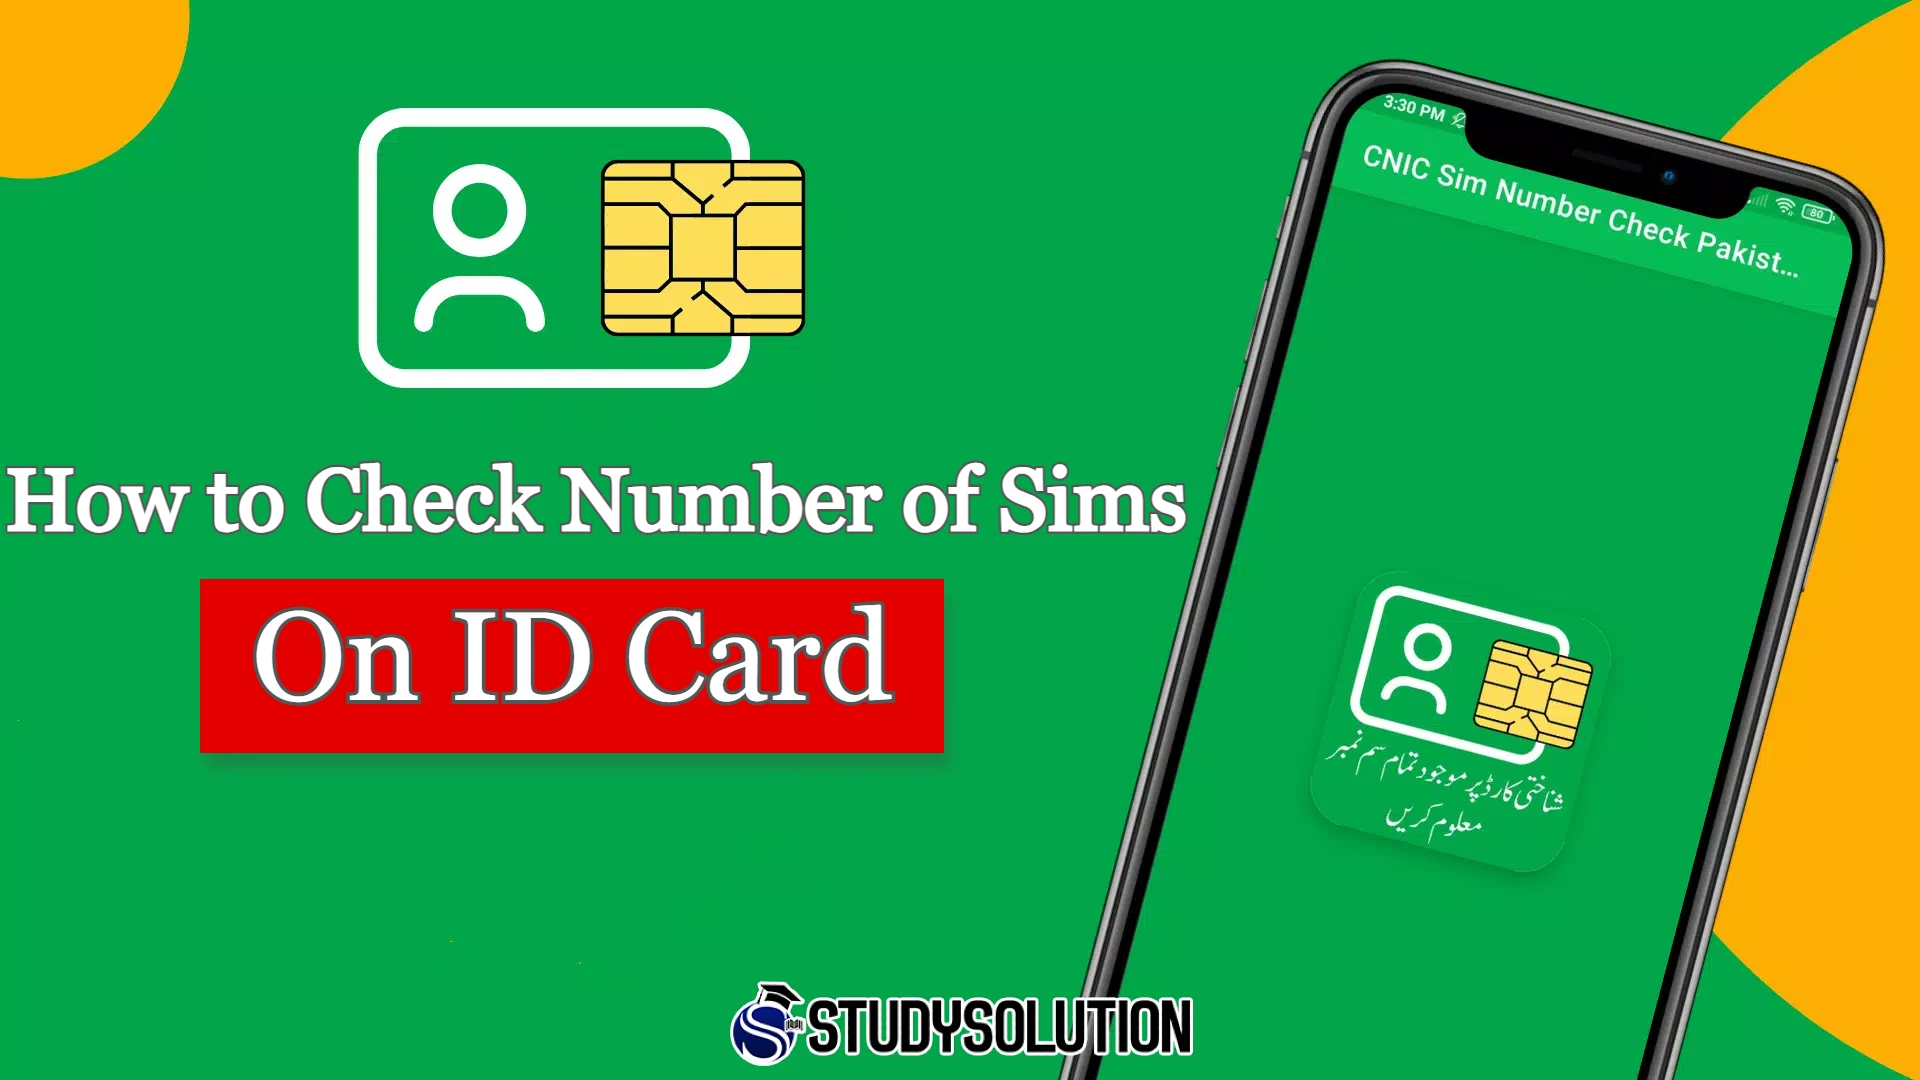 How to Check Number of Sims on ID Card